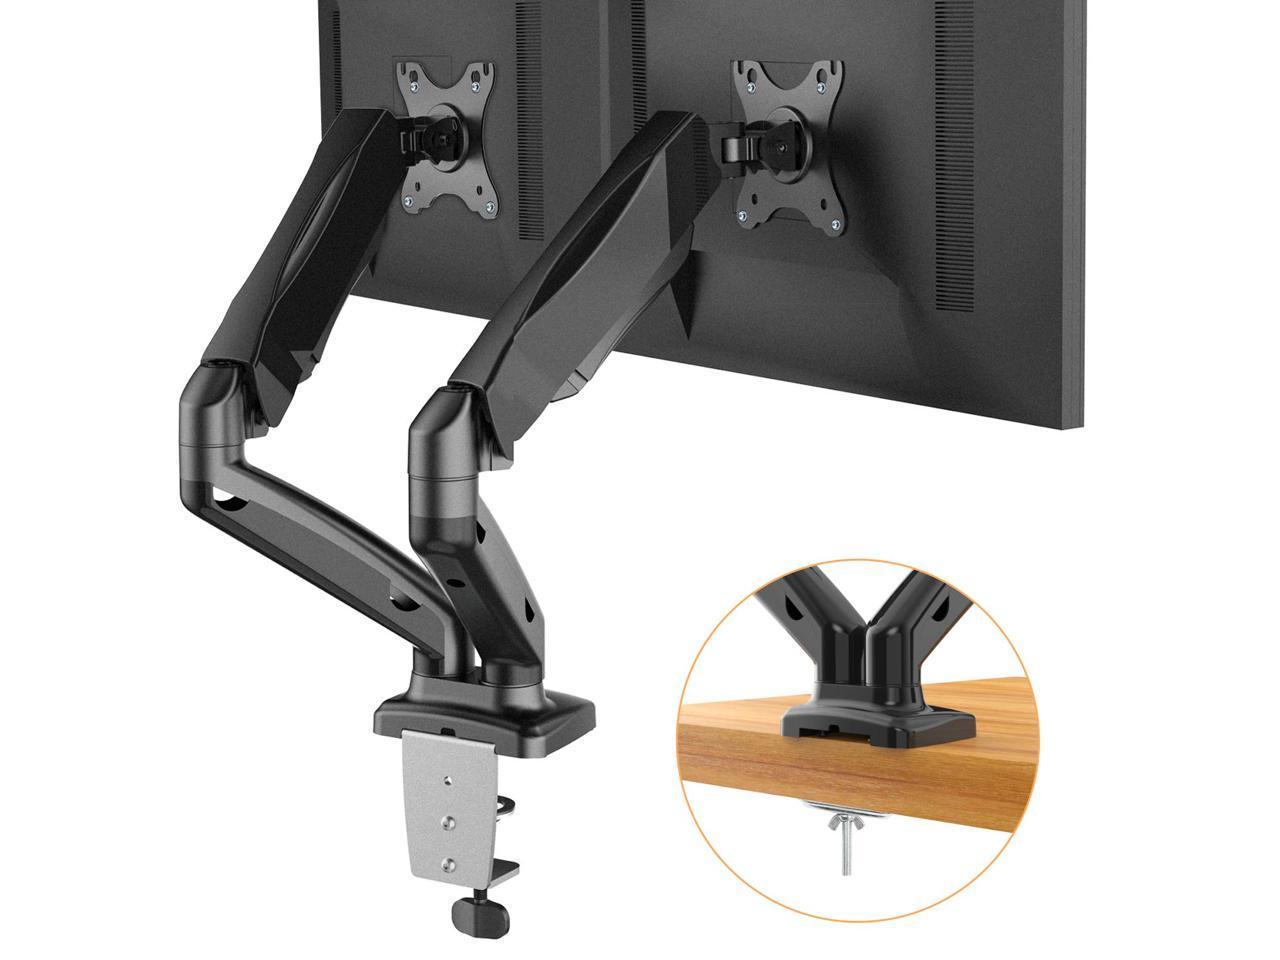 HUANUO Dual Monitor Stand - Fully Adjustable Monitor Desk Mount Gas Spring LCD Monitor Arm for $38.99 + Free $5 Newegg GC + Free Shipping